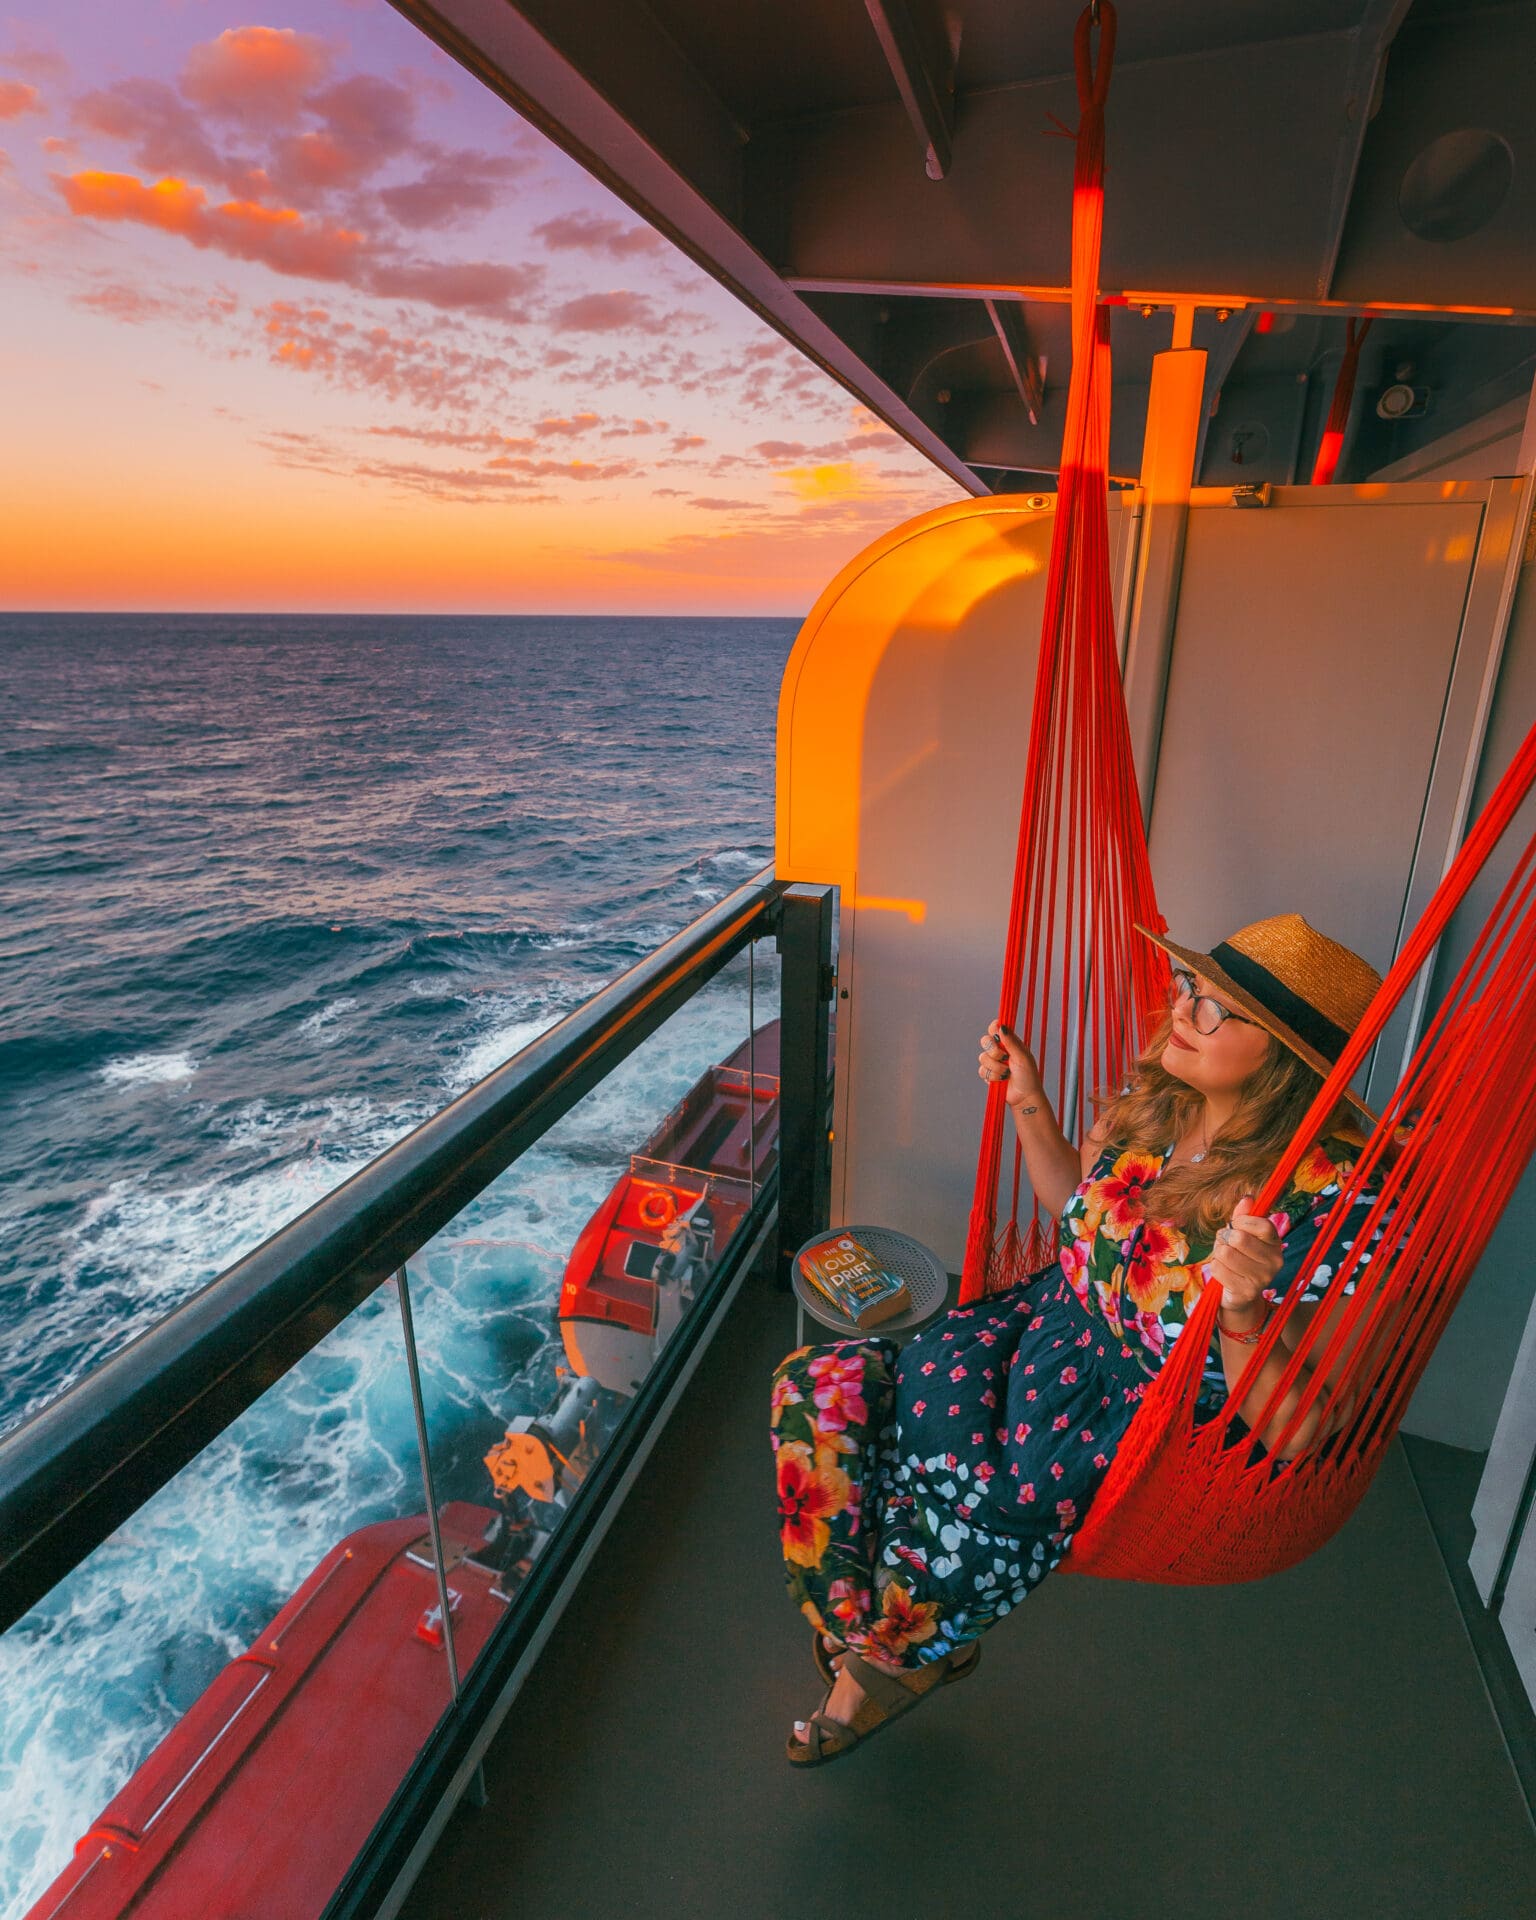 Sitting in a hammock at sunset in our balcony cabin onboard Virgin Voyages